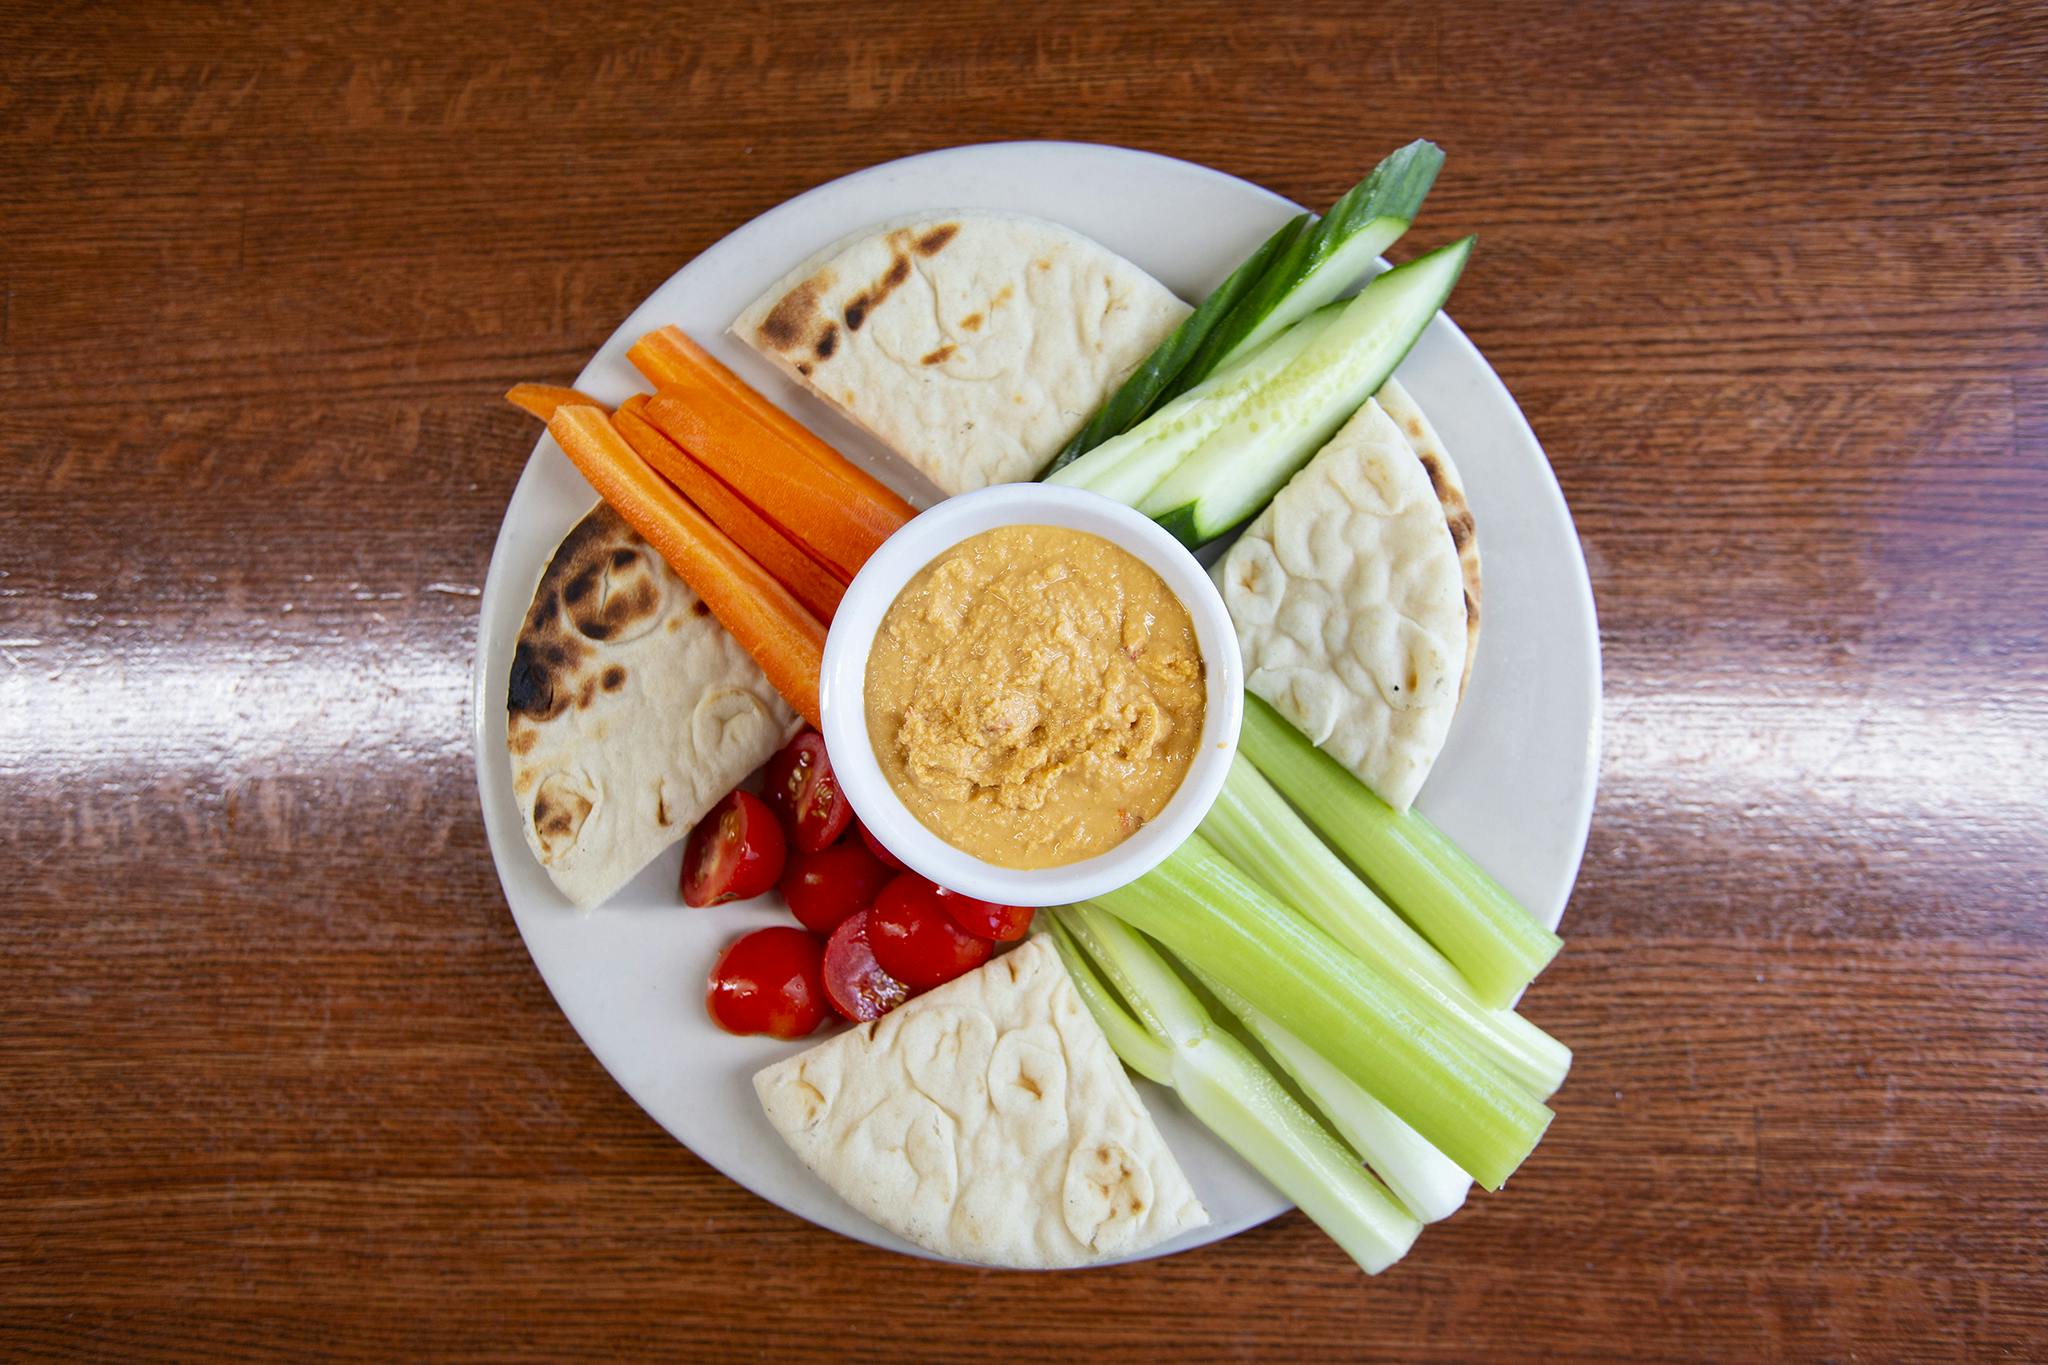 Veggie Hummus Plate from Candlelite Chicago in Chicago, IL